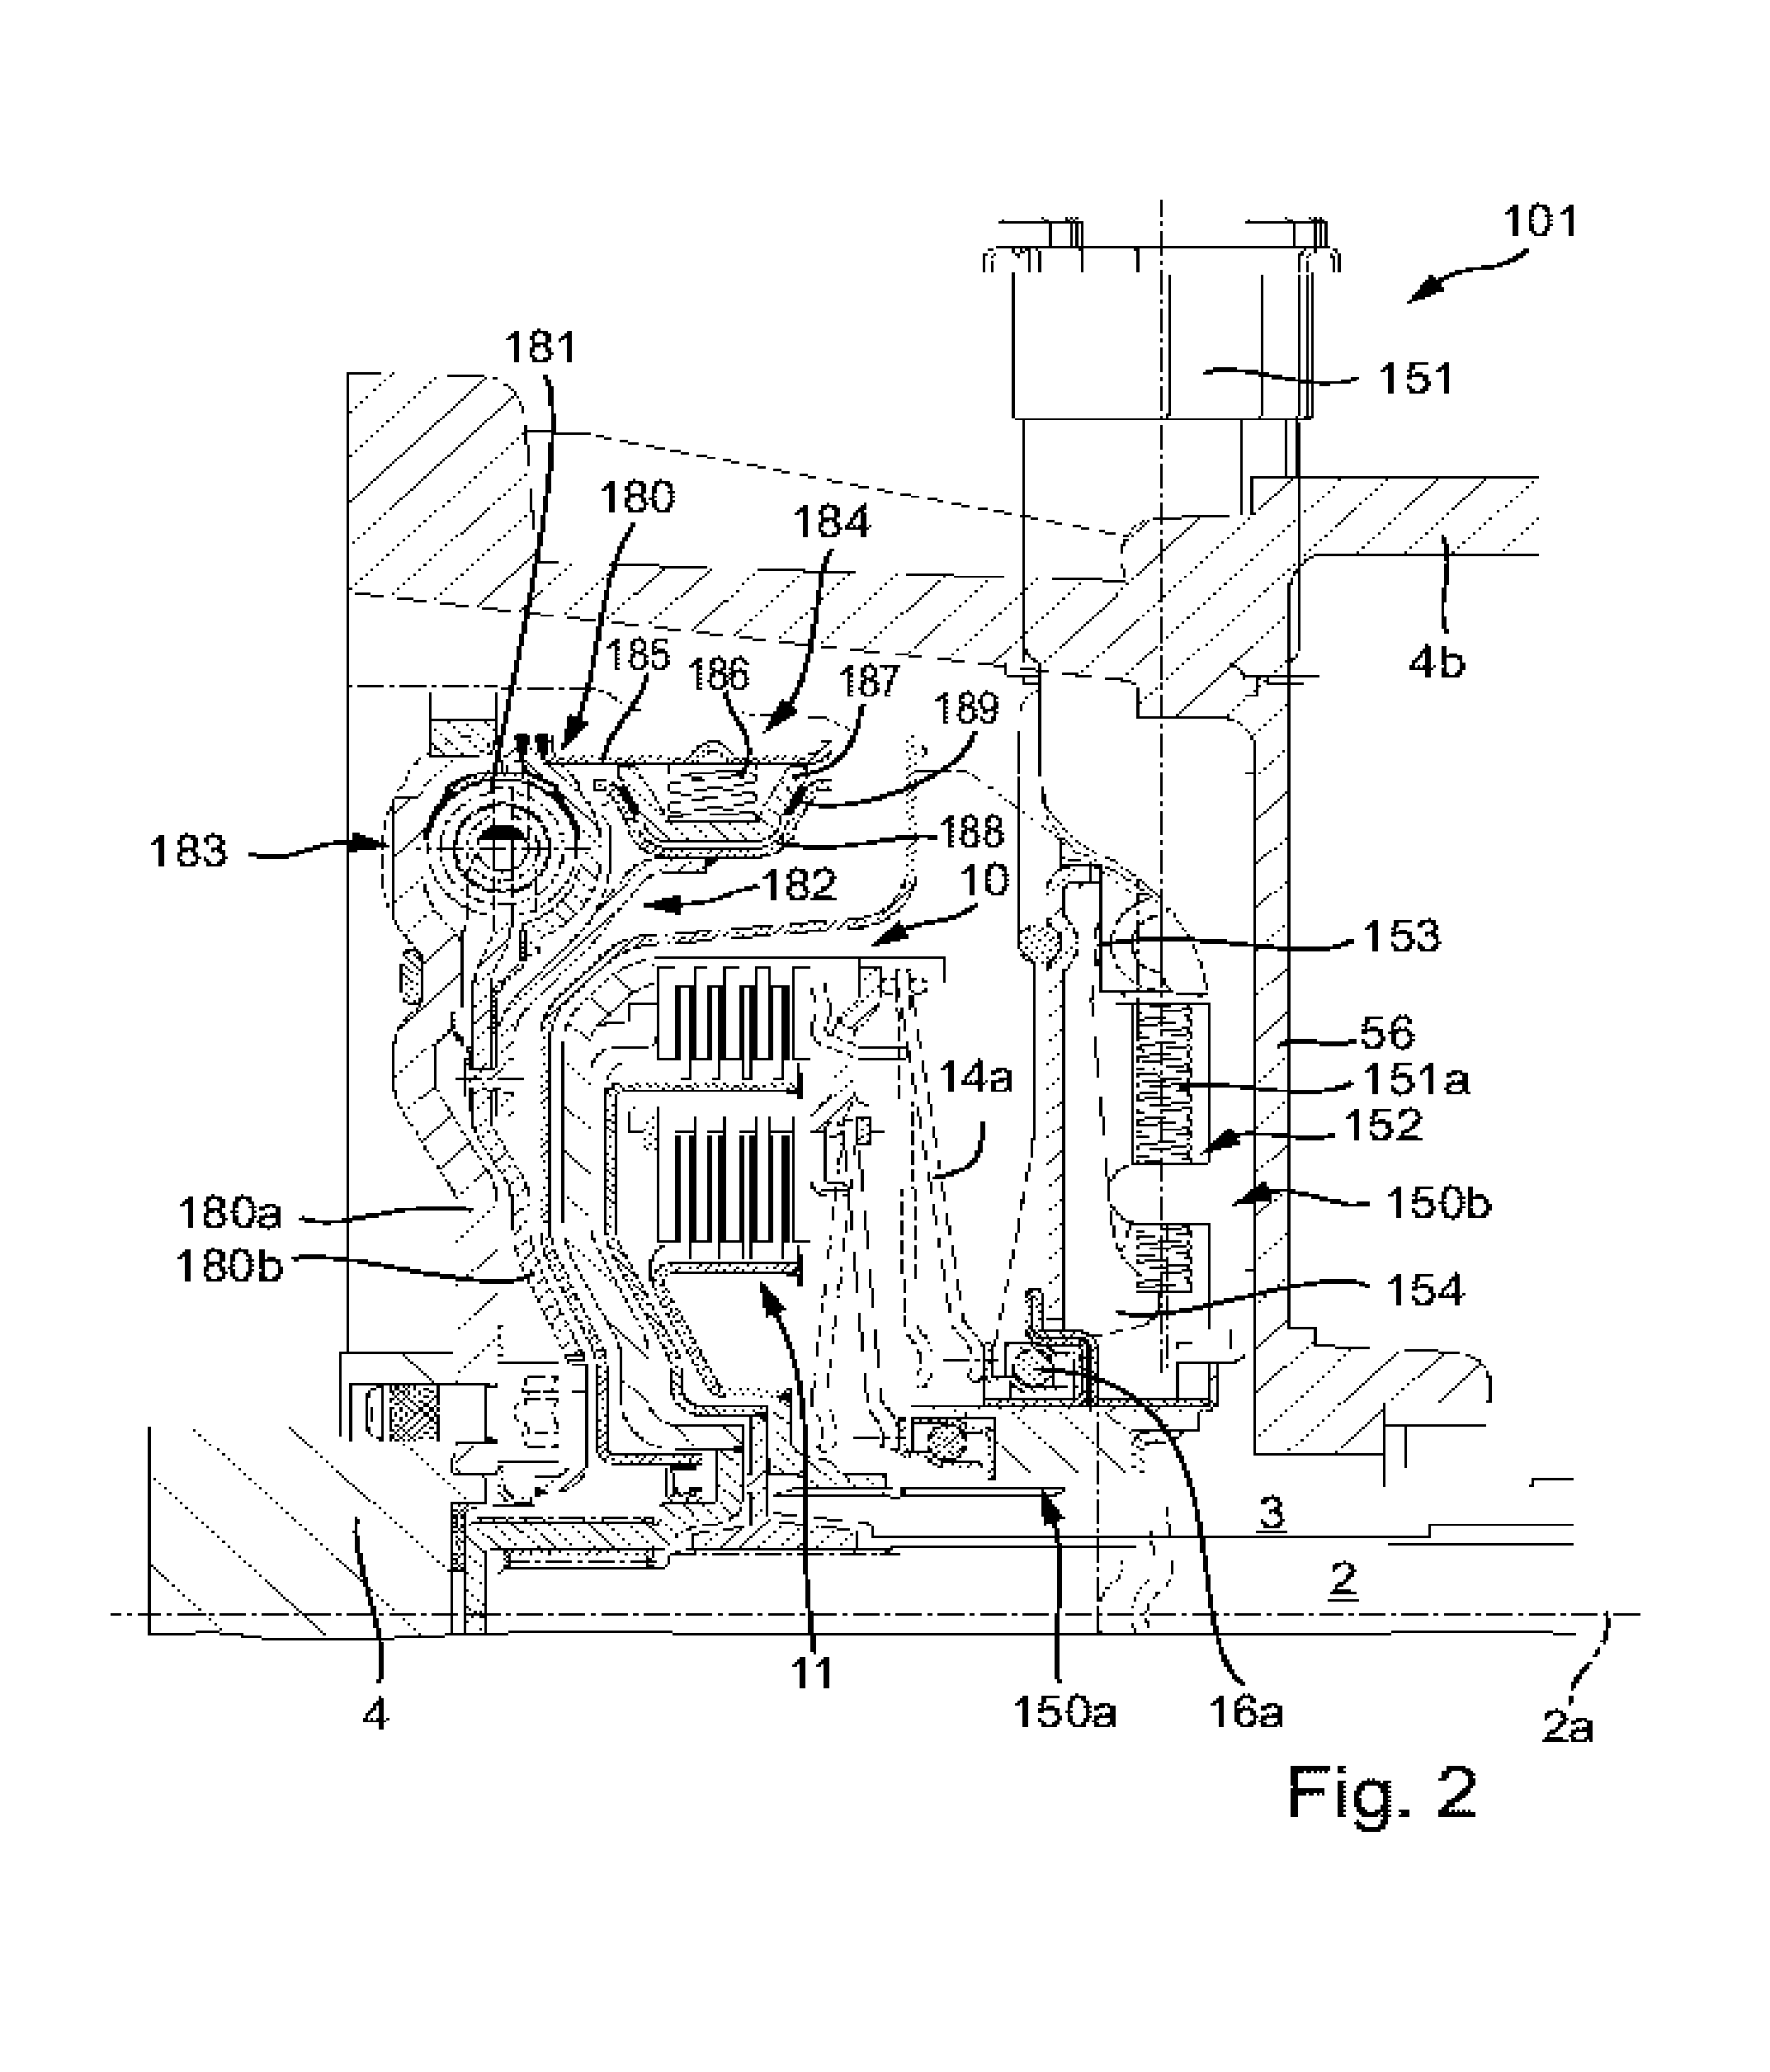 Torque transmitting unit and drive train for it